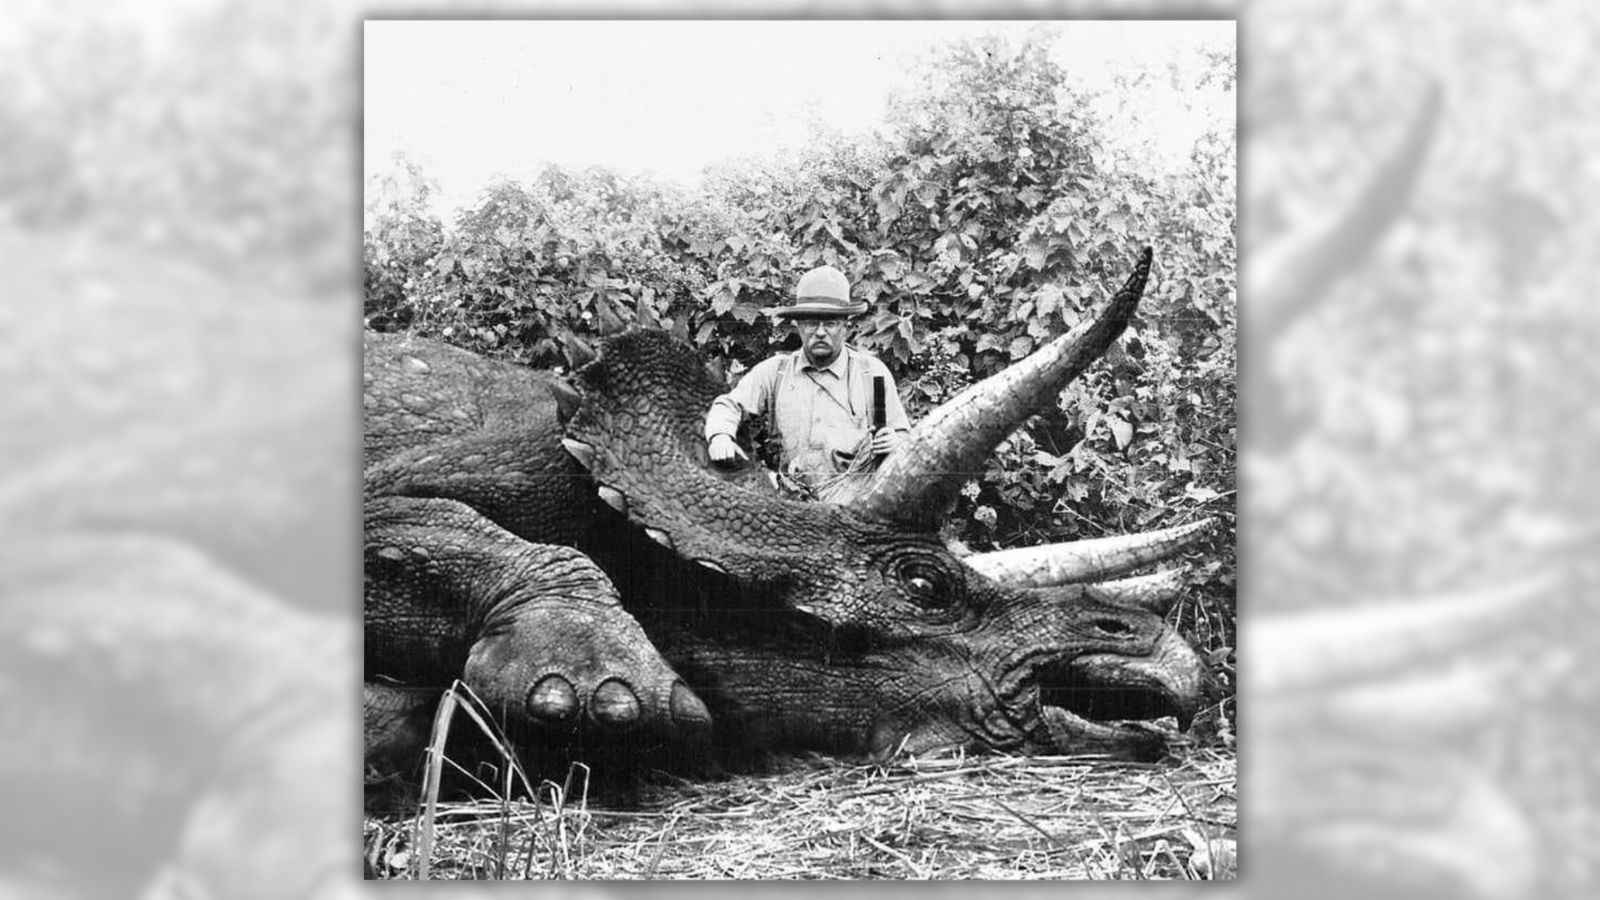 Fact Check: Theodore Roosevelt Supposedly Posed for Photo with Last Known Triceratops. Here Are the Facts